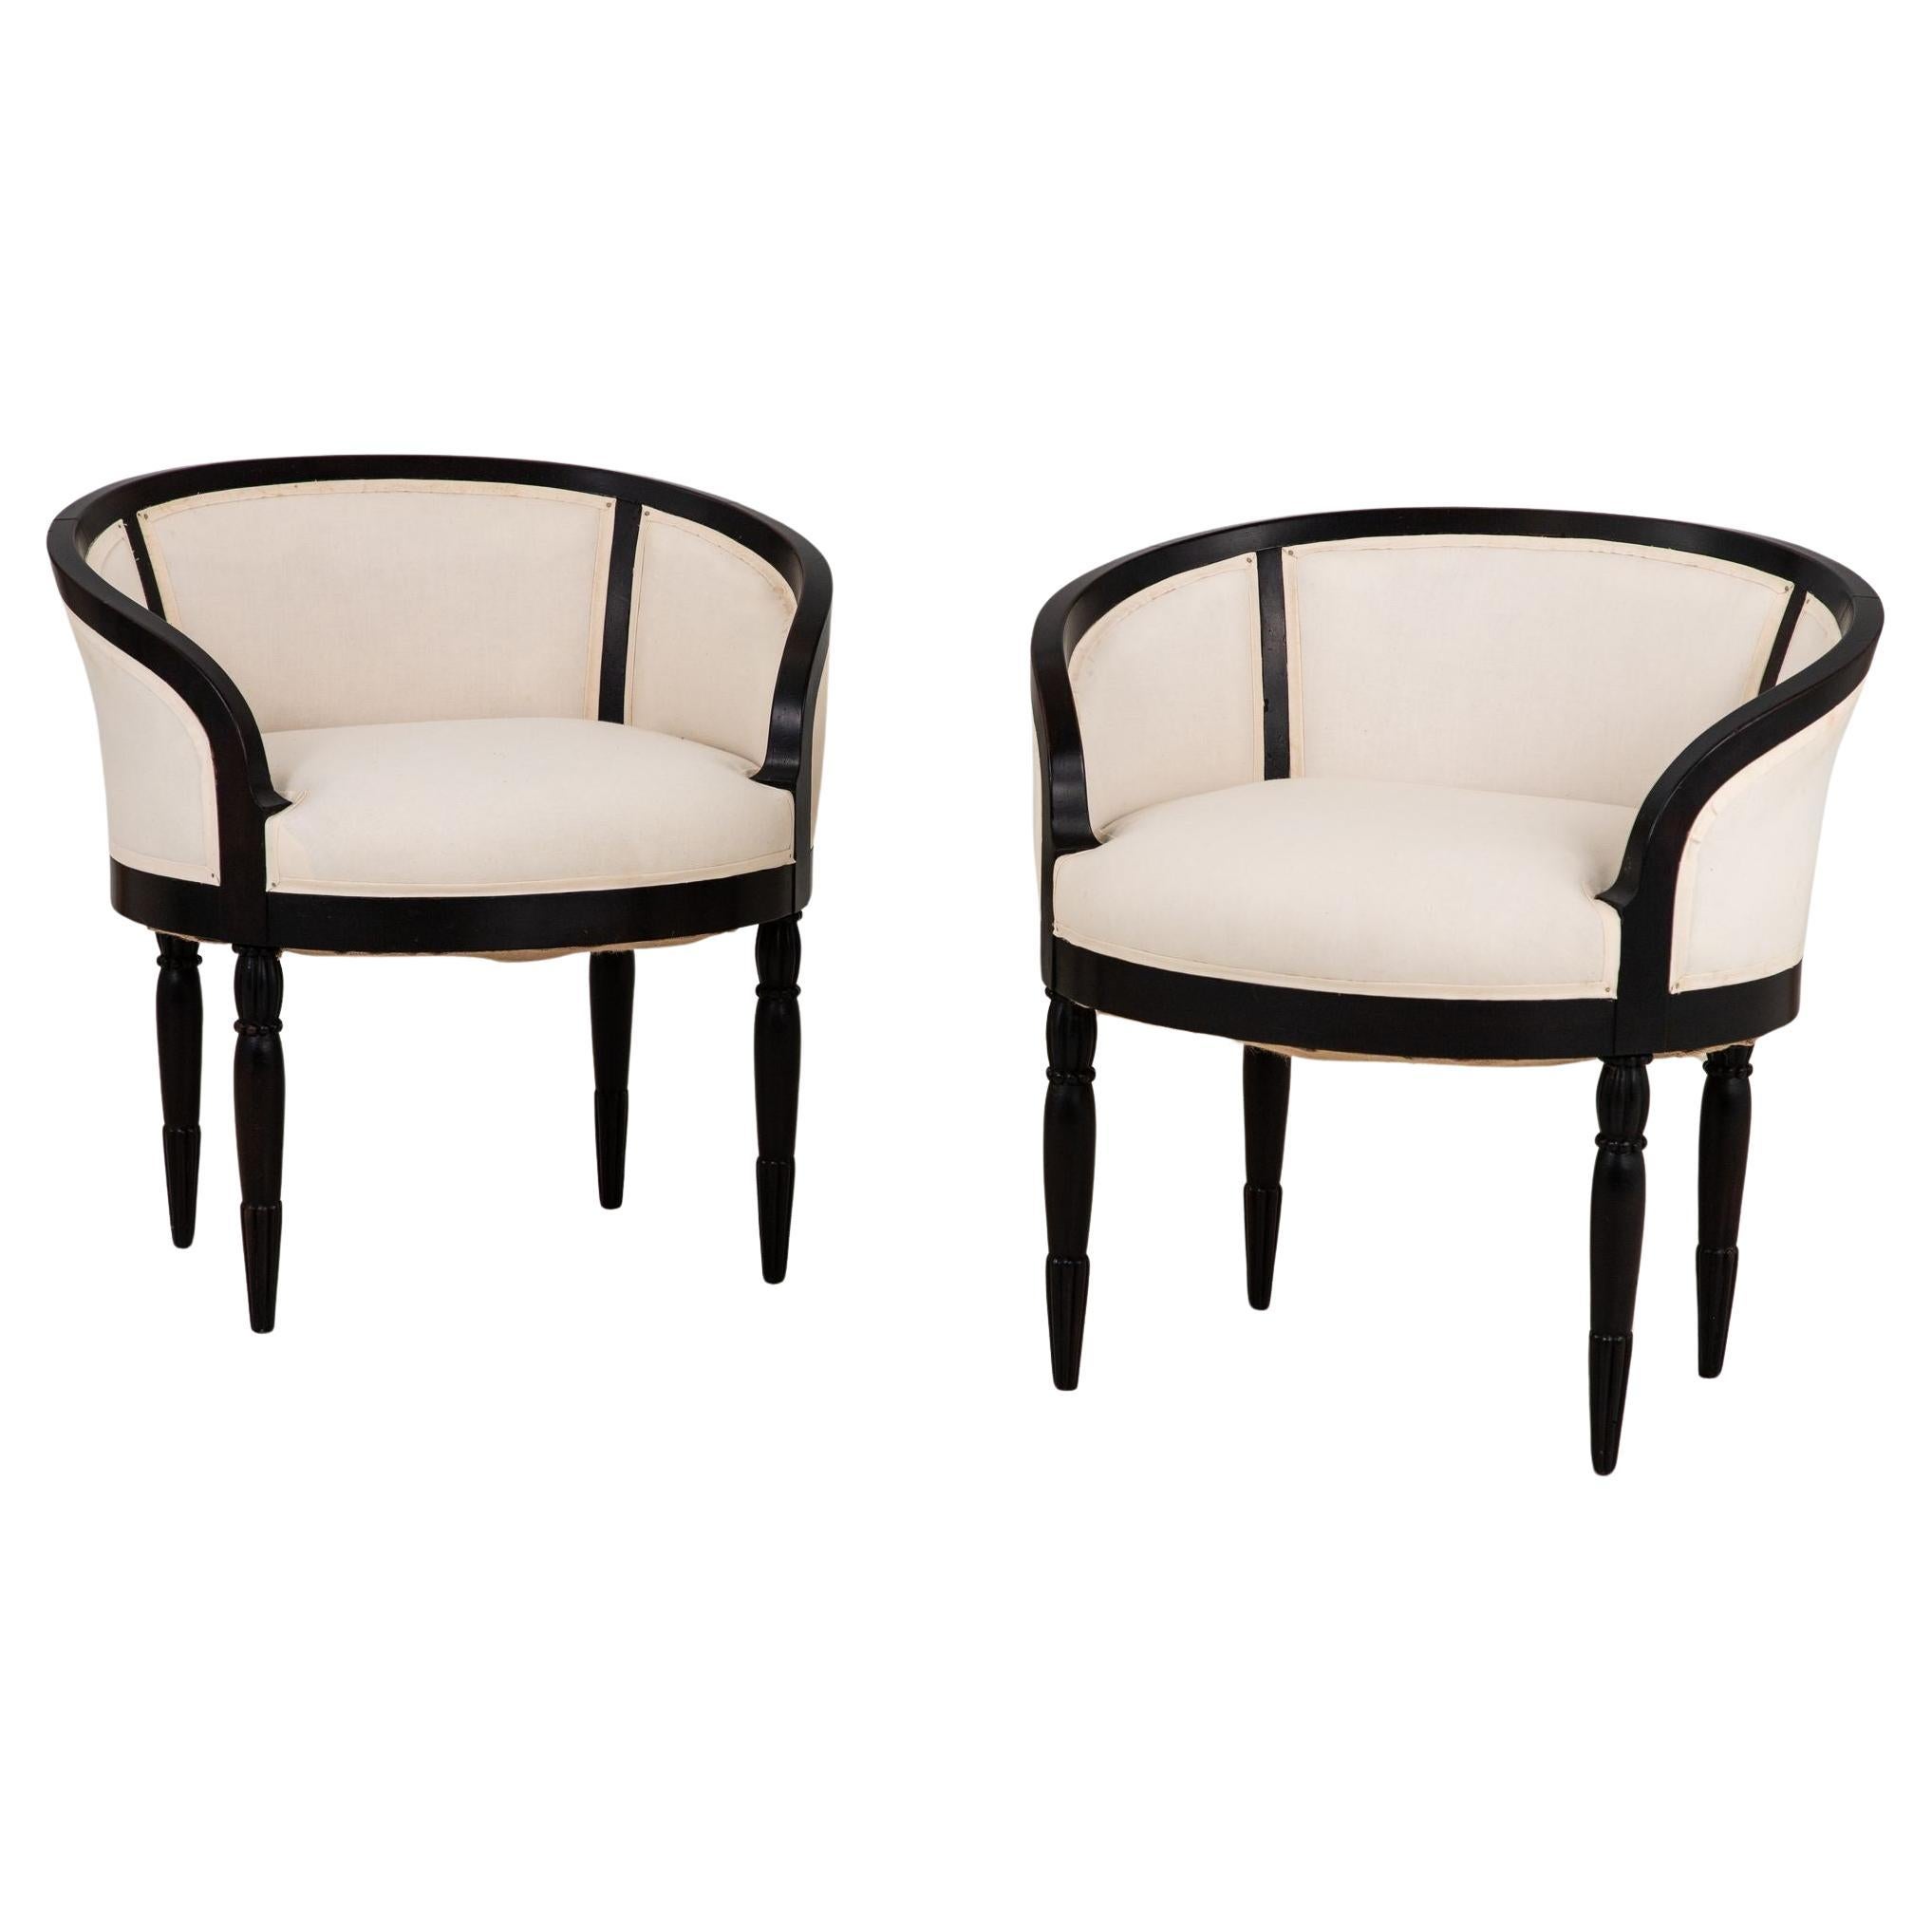 Pair French Art Deco Chairs, 1930s